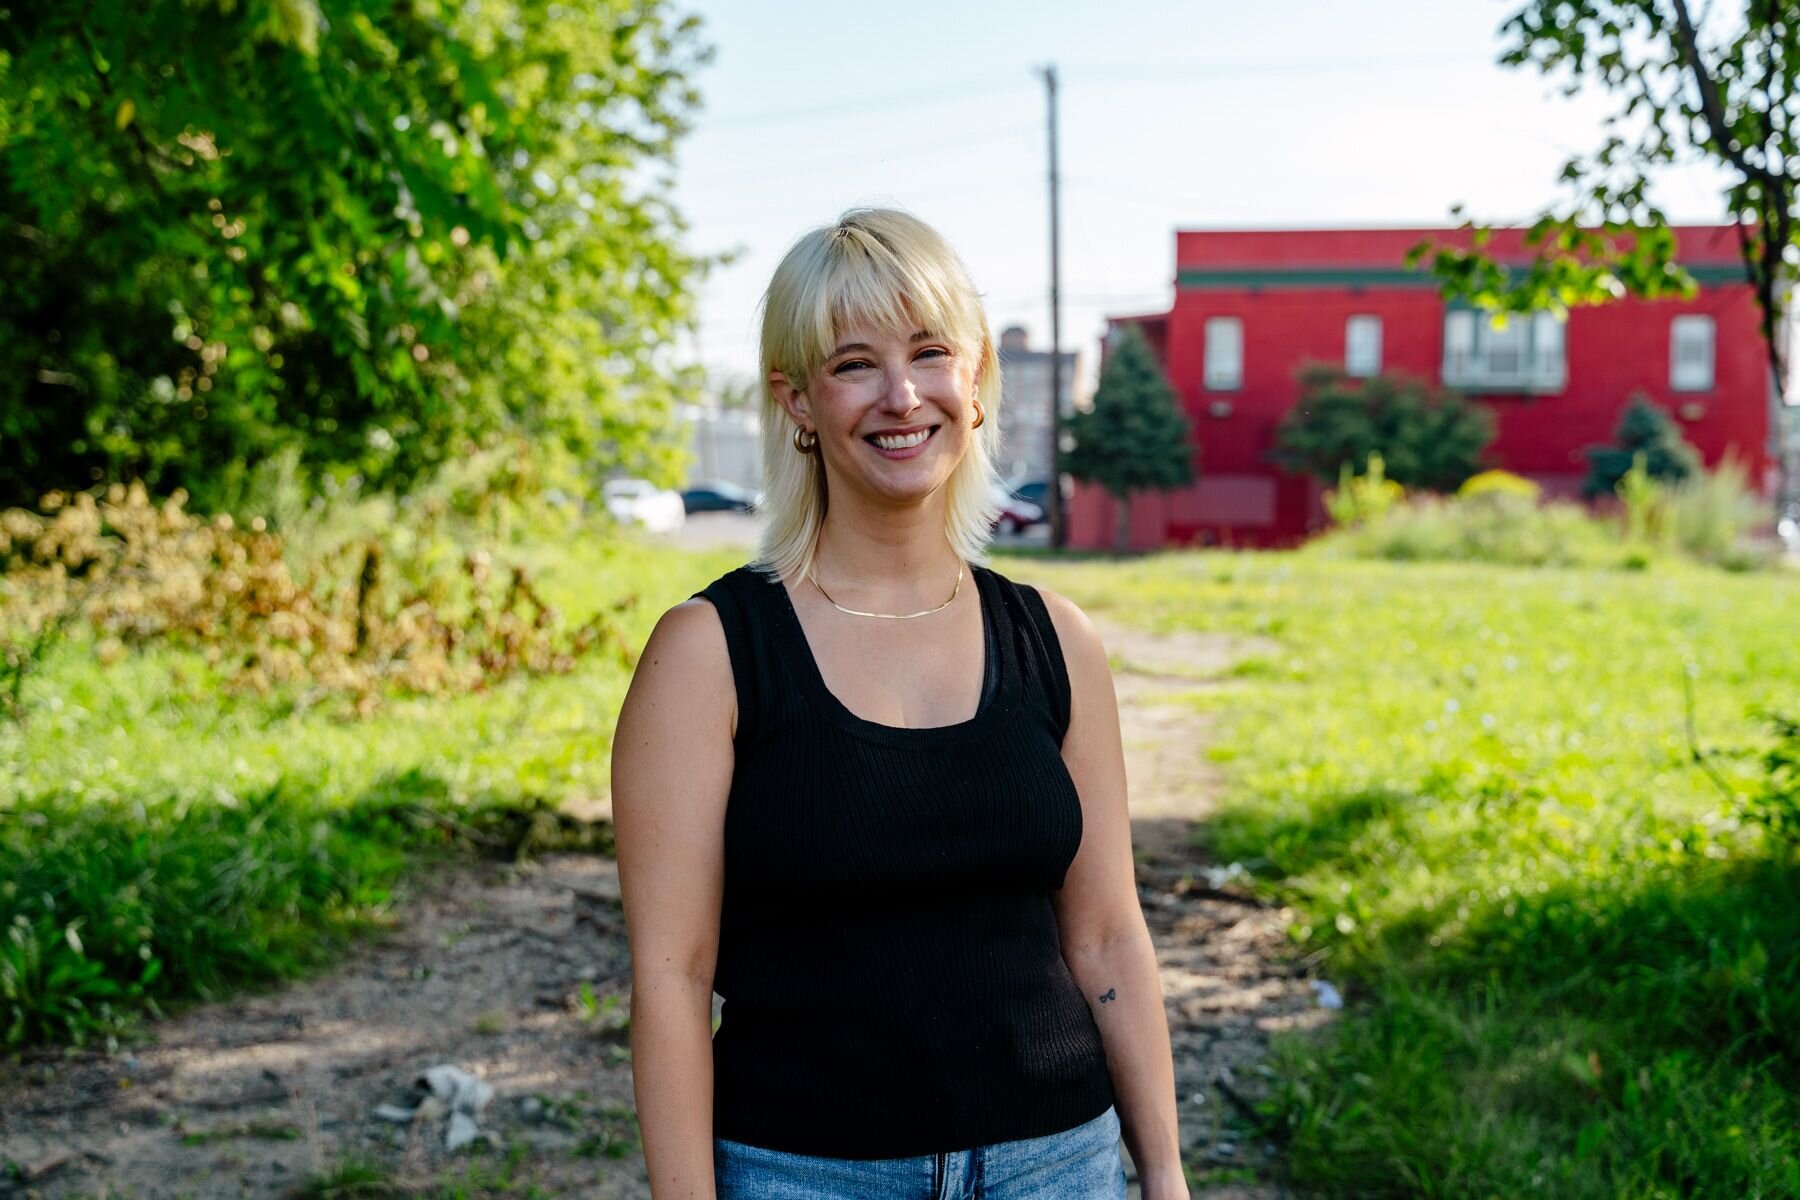 Martha Potere stands in an abandoned lot that will soon be home to the La Joya Gardens, a mixed-use development that includes affordable housing units.